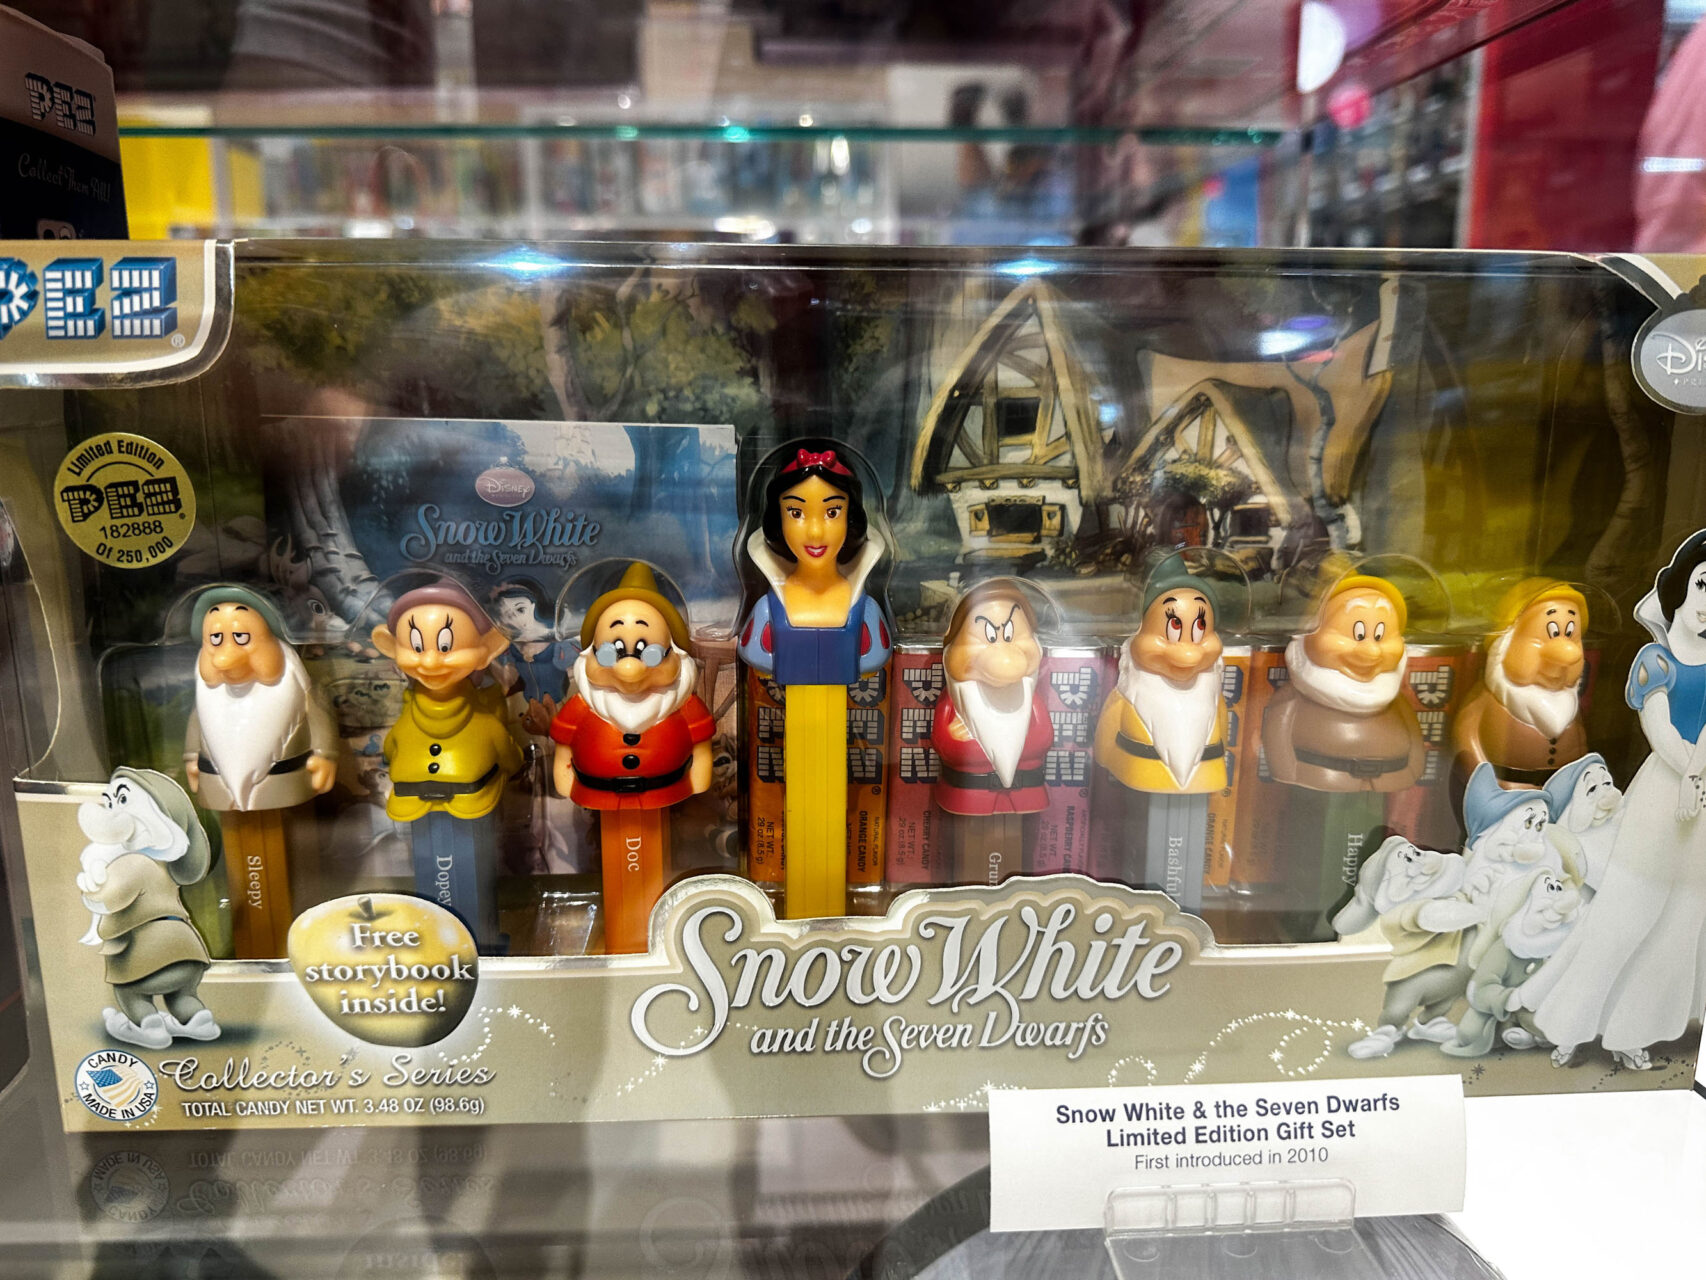 Snow White and the 7 Dwarves Pez dispensers.